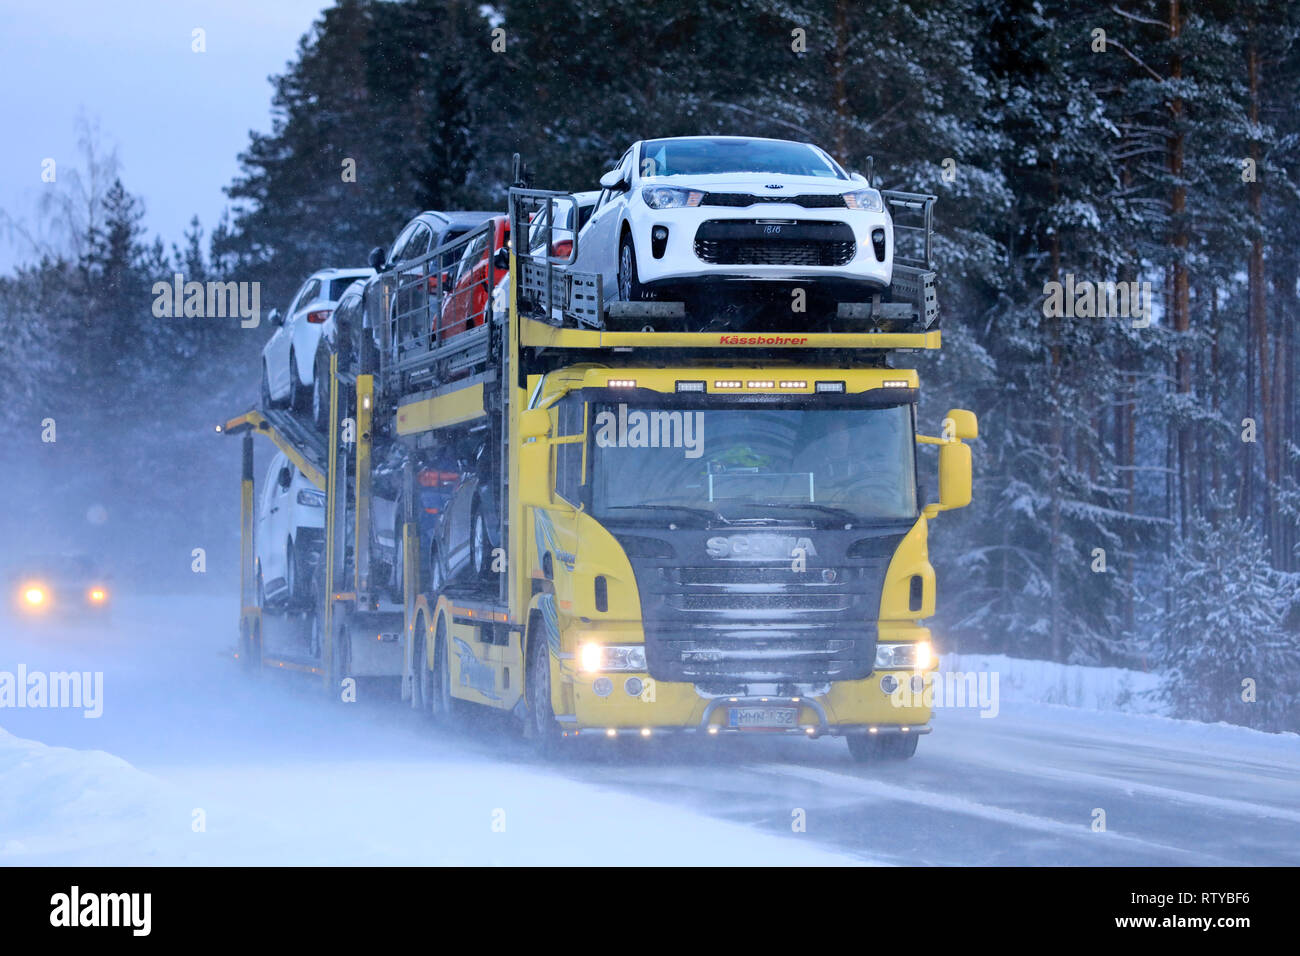 Salo, Finland - January 18, 2019: Yellow Scania car carrier truck travels in the snow trail of another vehicle on a day of winter snowfall in Finland. Stock Photo